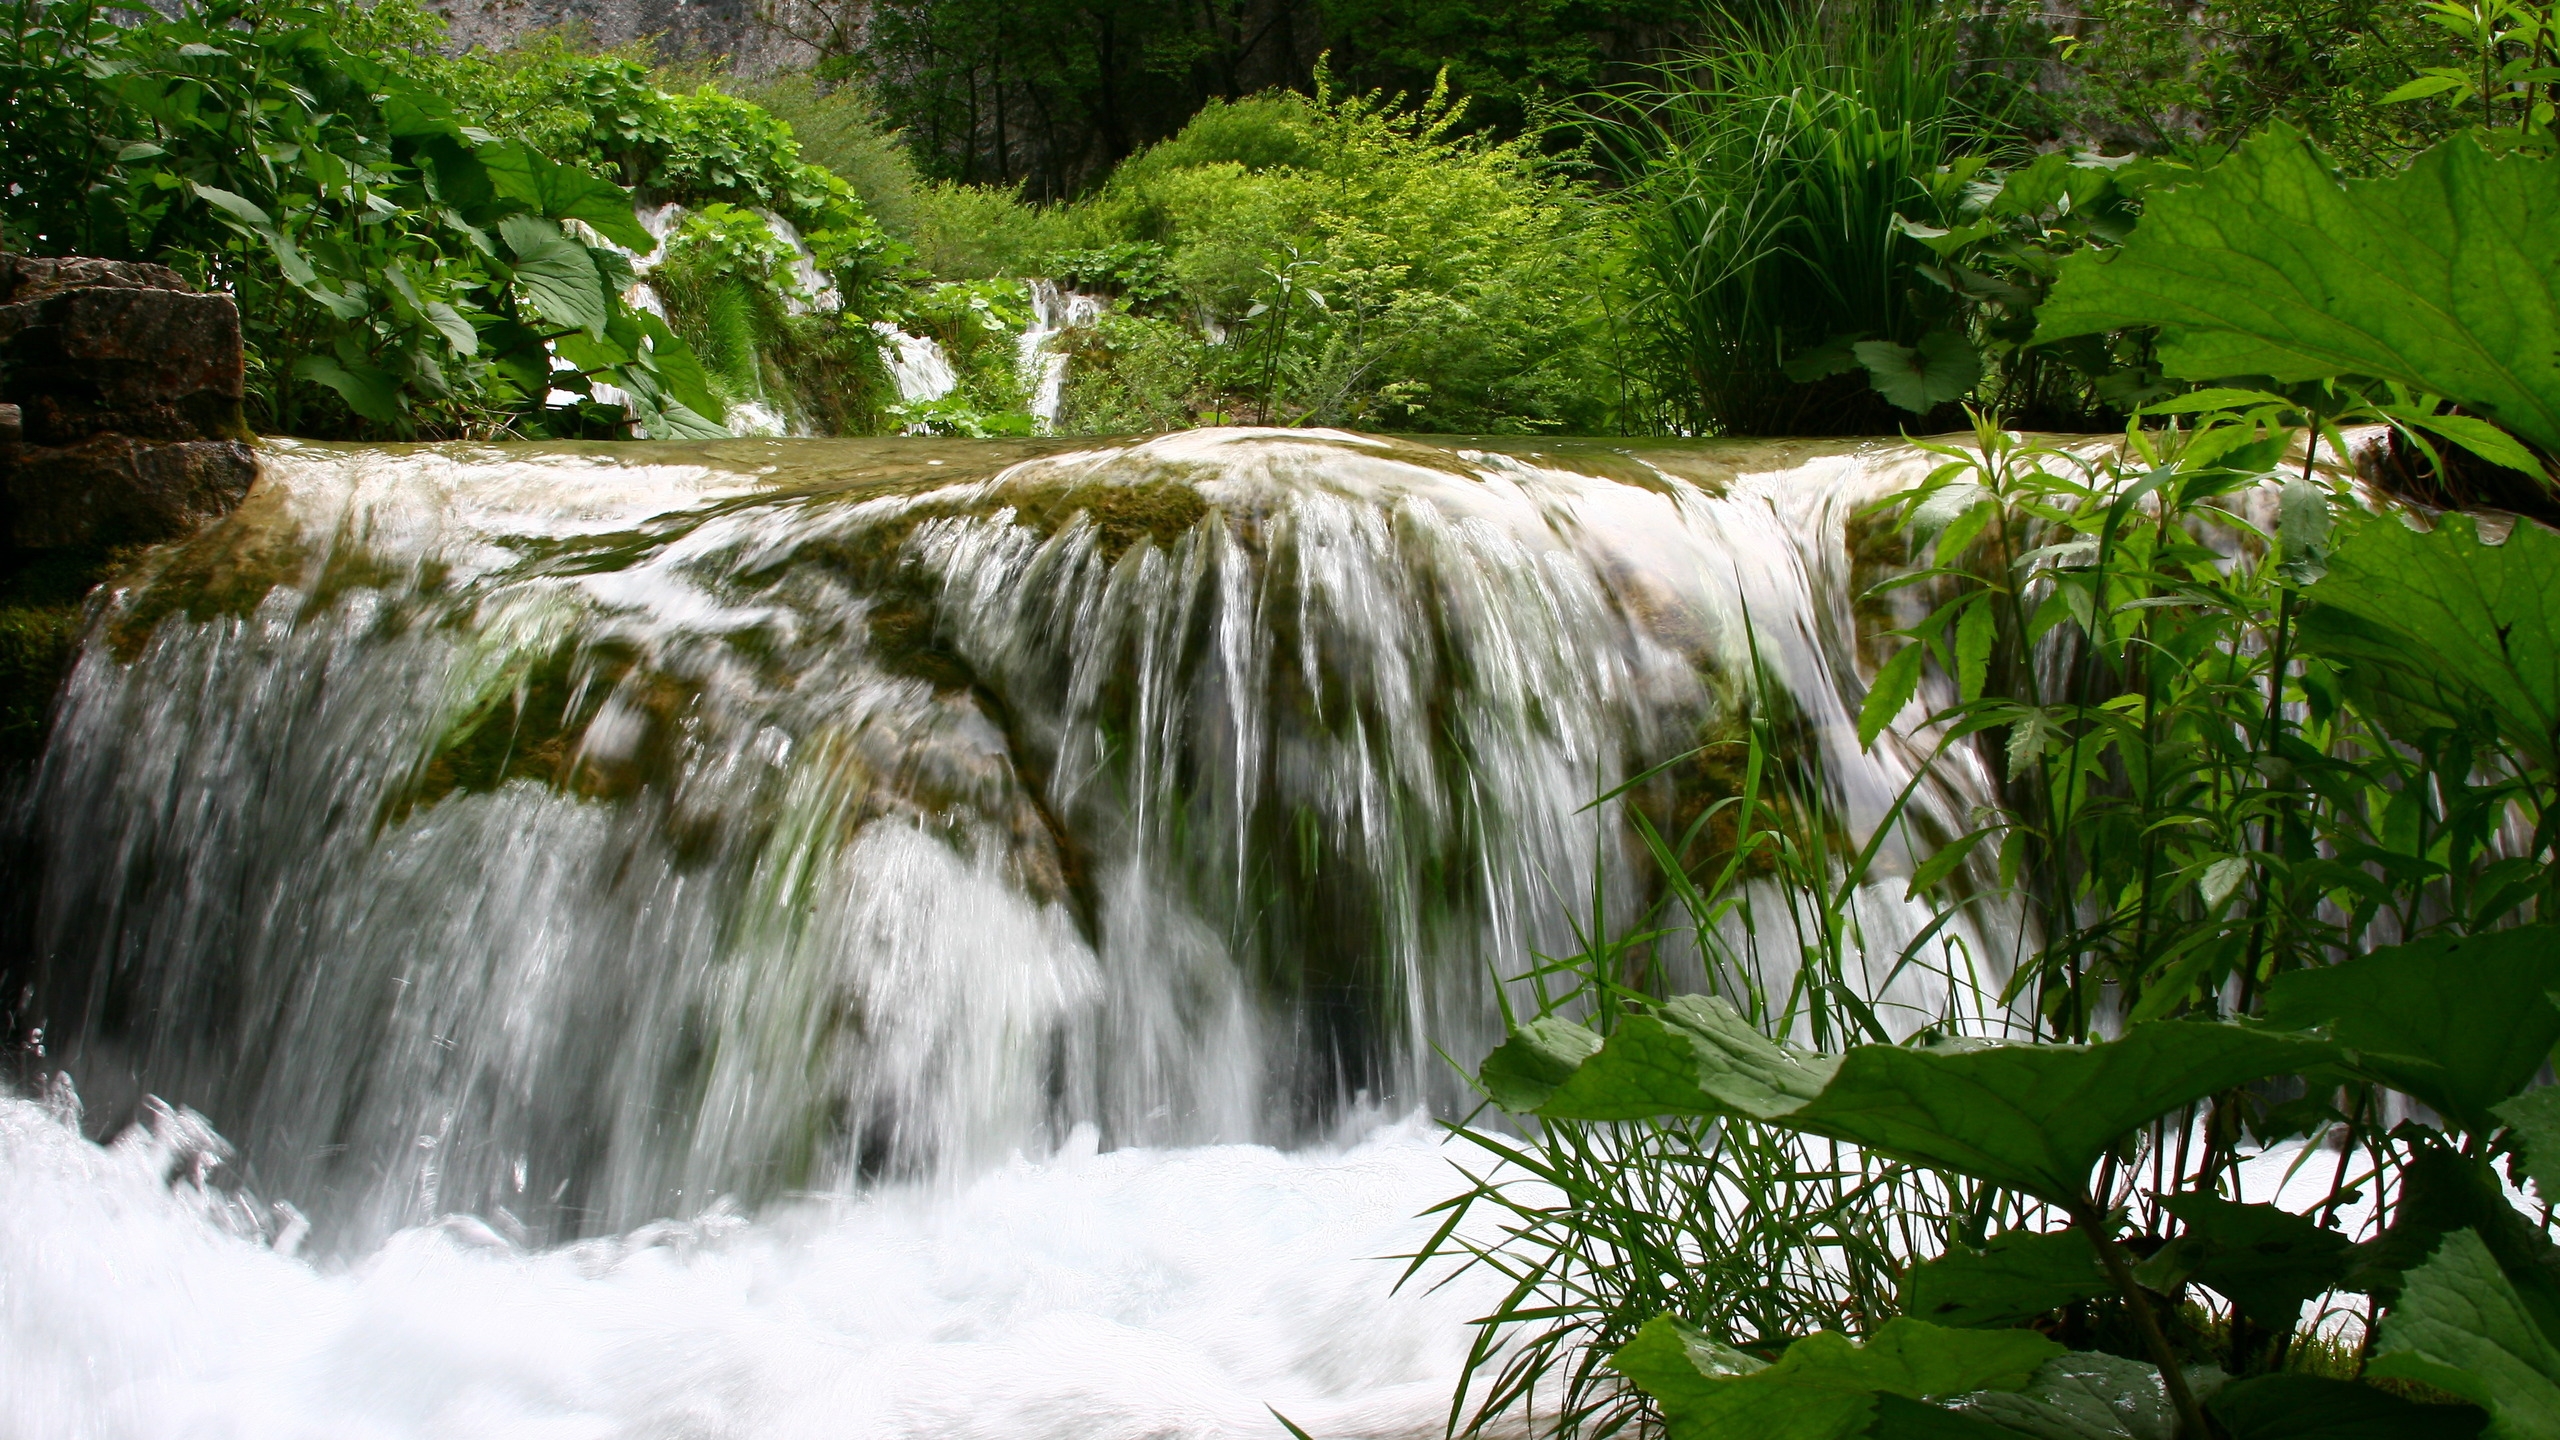 Forest Waterfall for 2560x1440 HDTV resolution